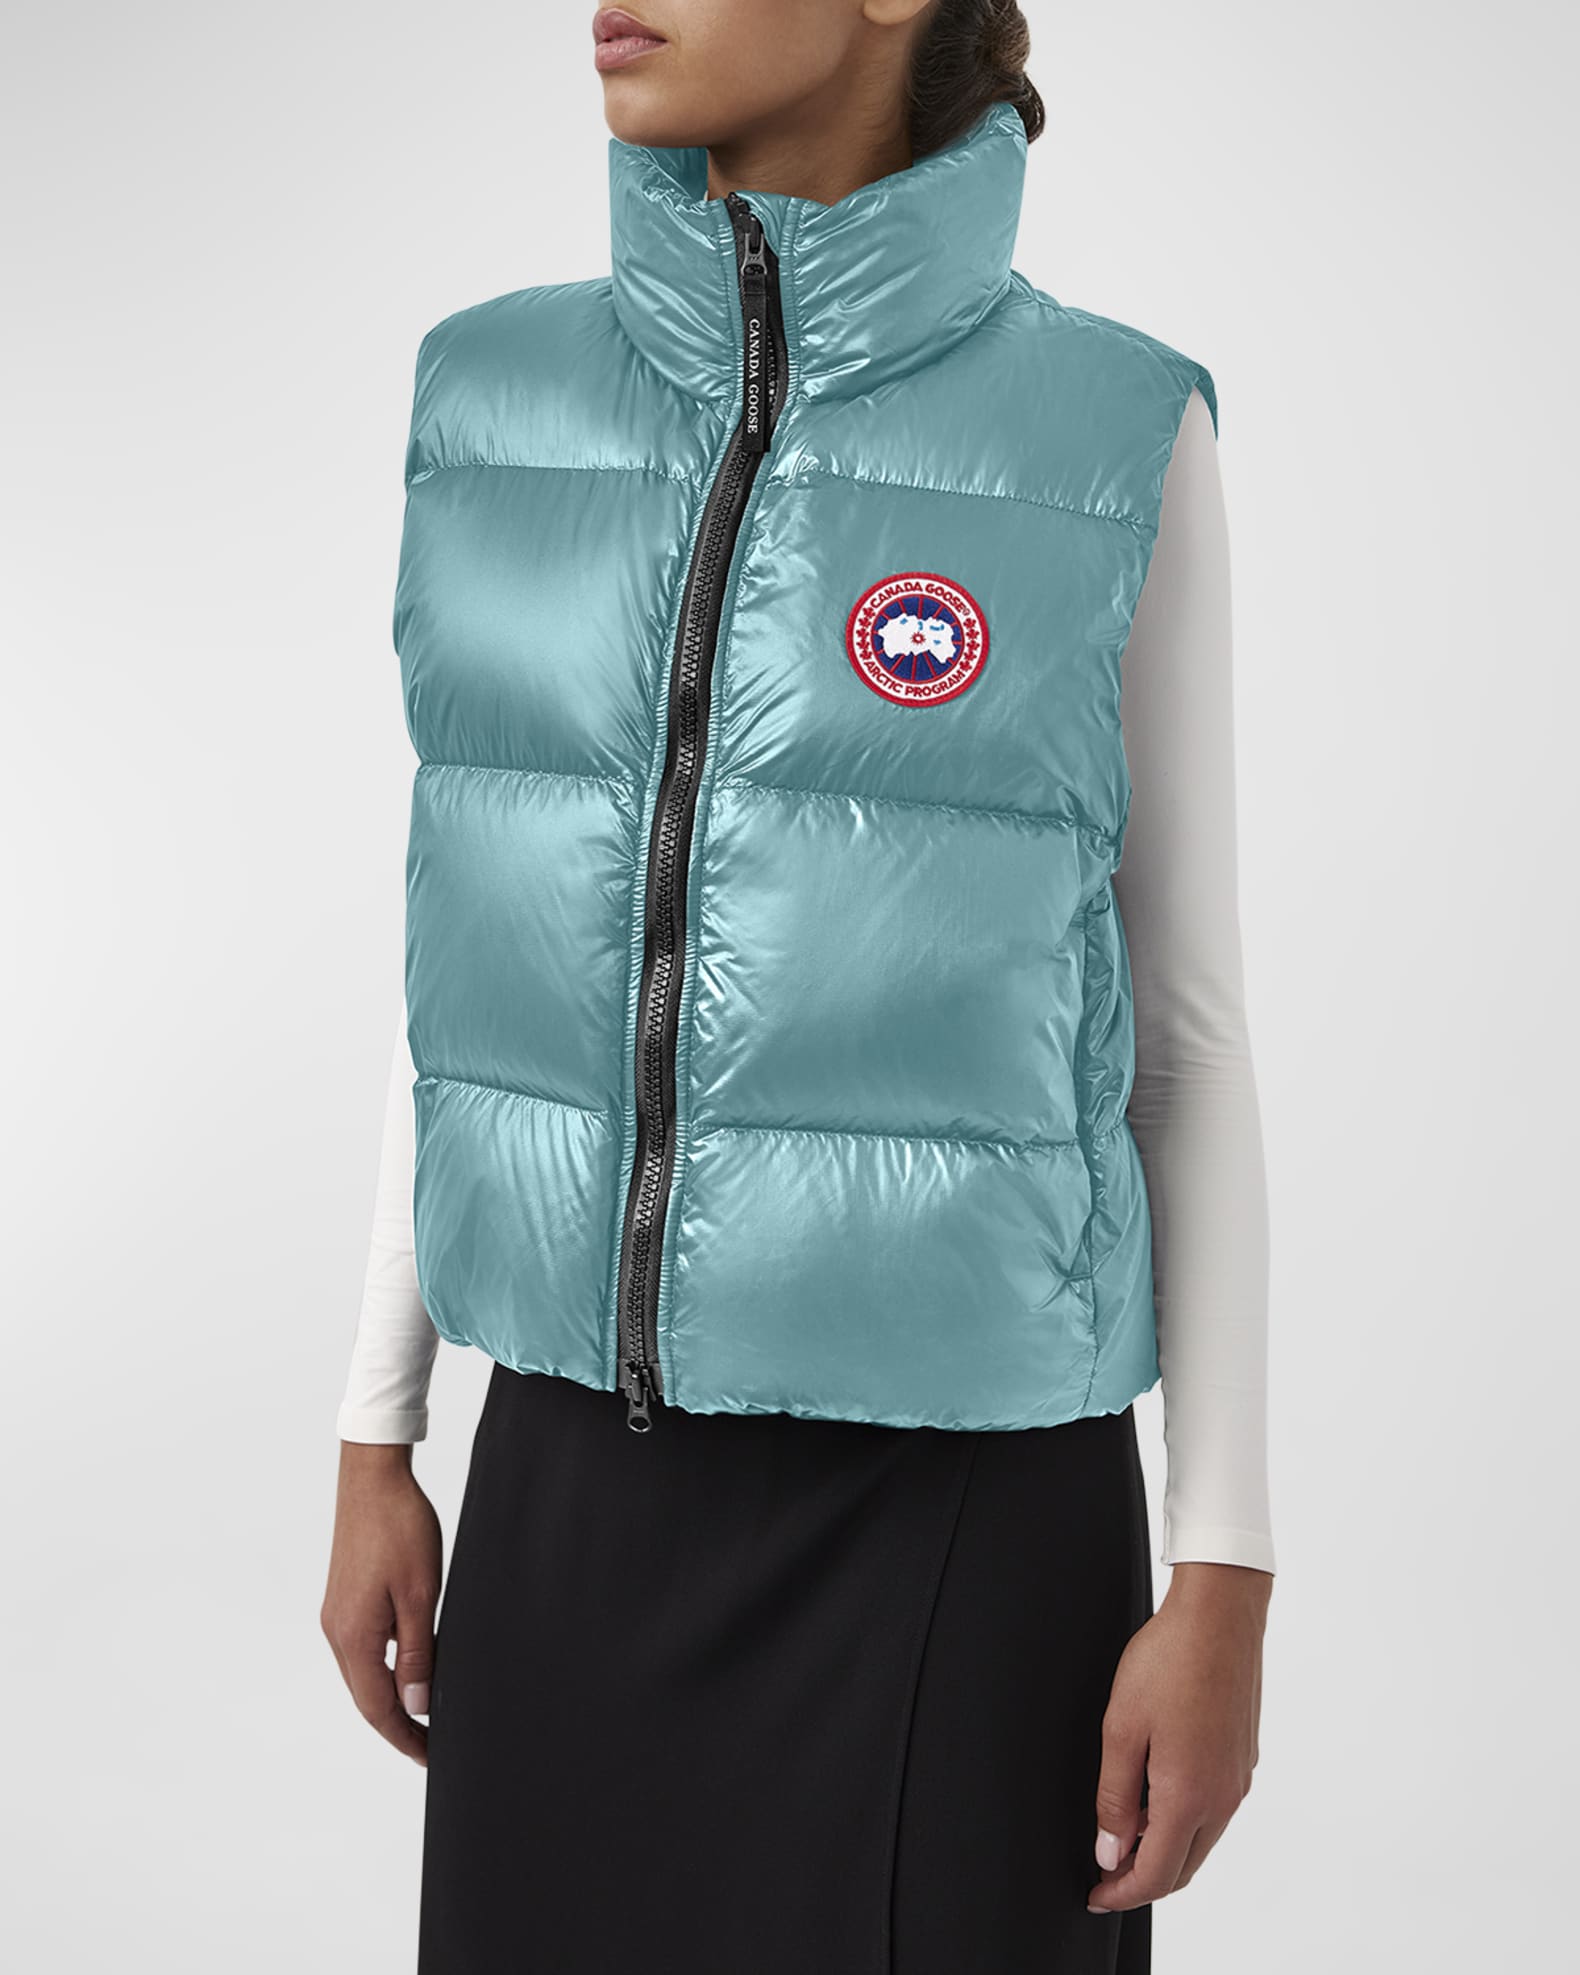 2-in-1 Wrap Neck Puffer/Gilet - Stone